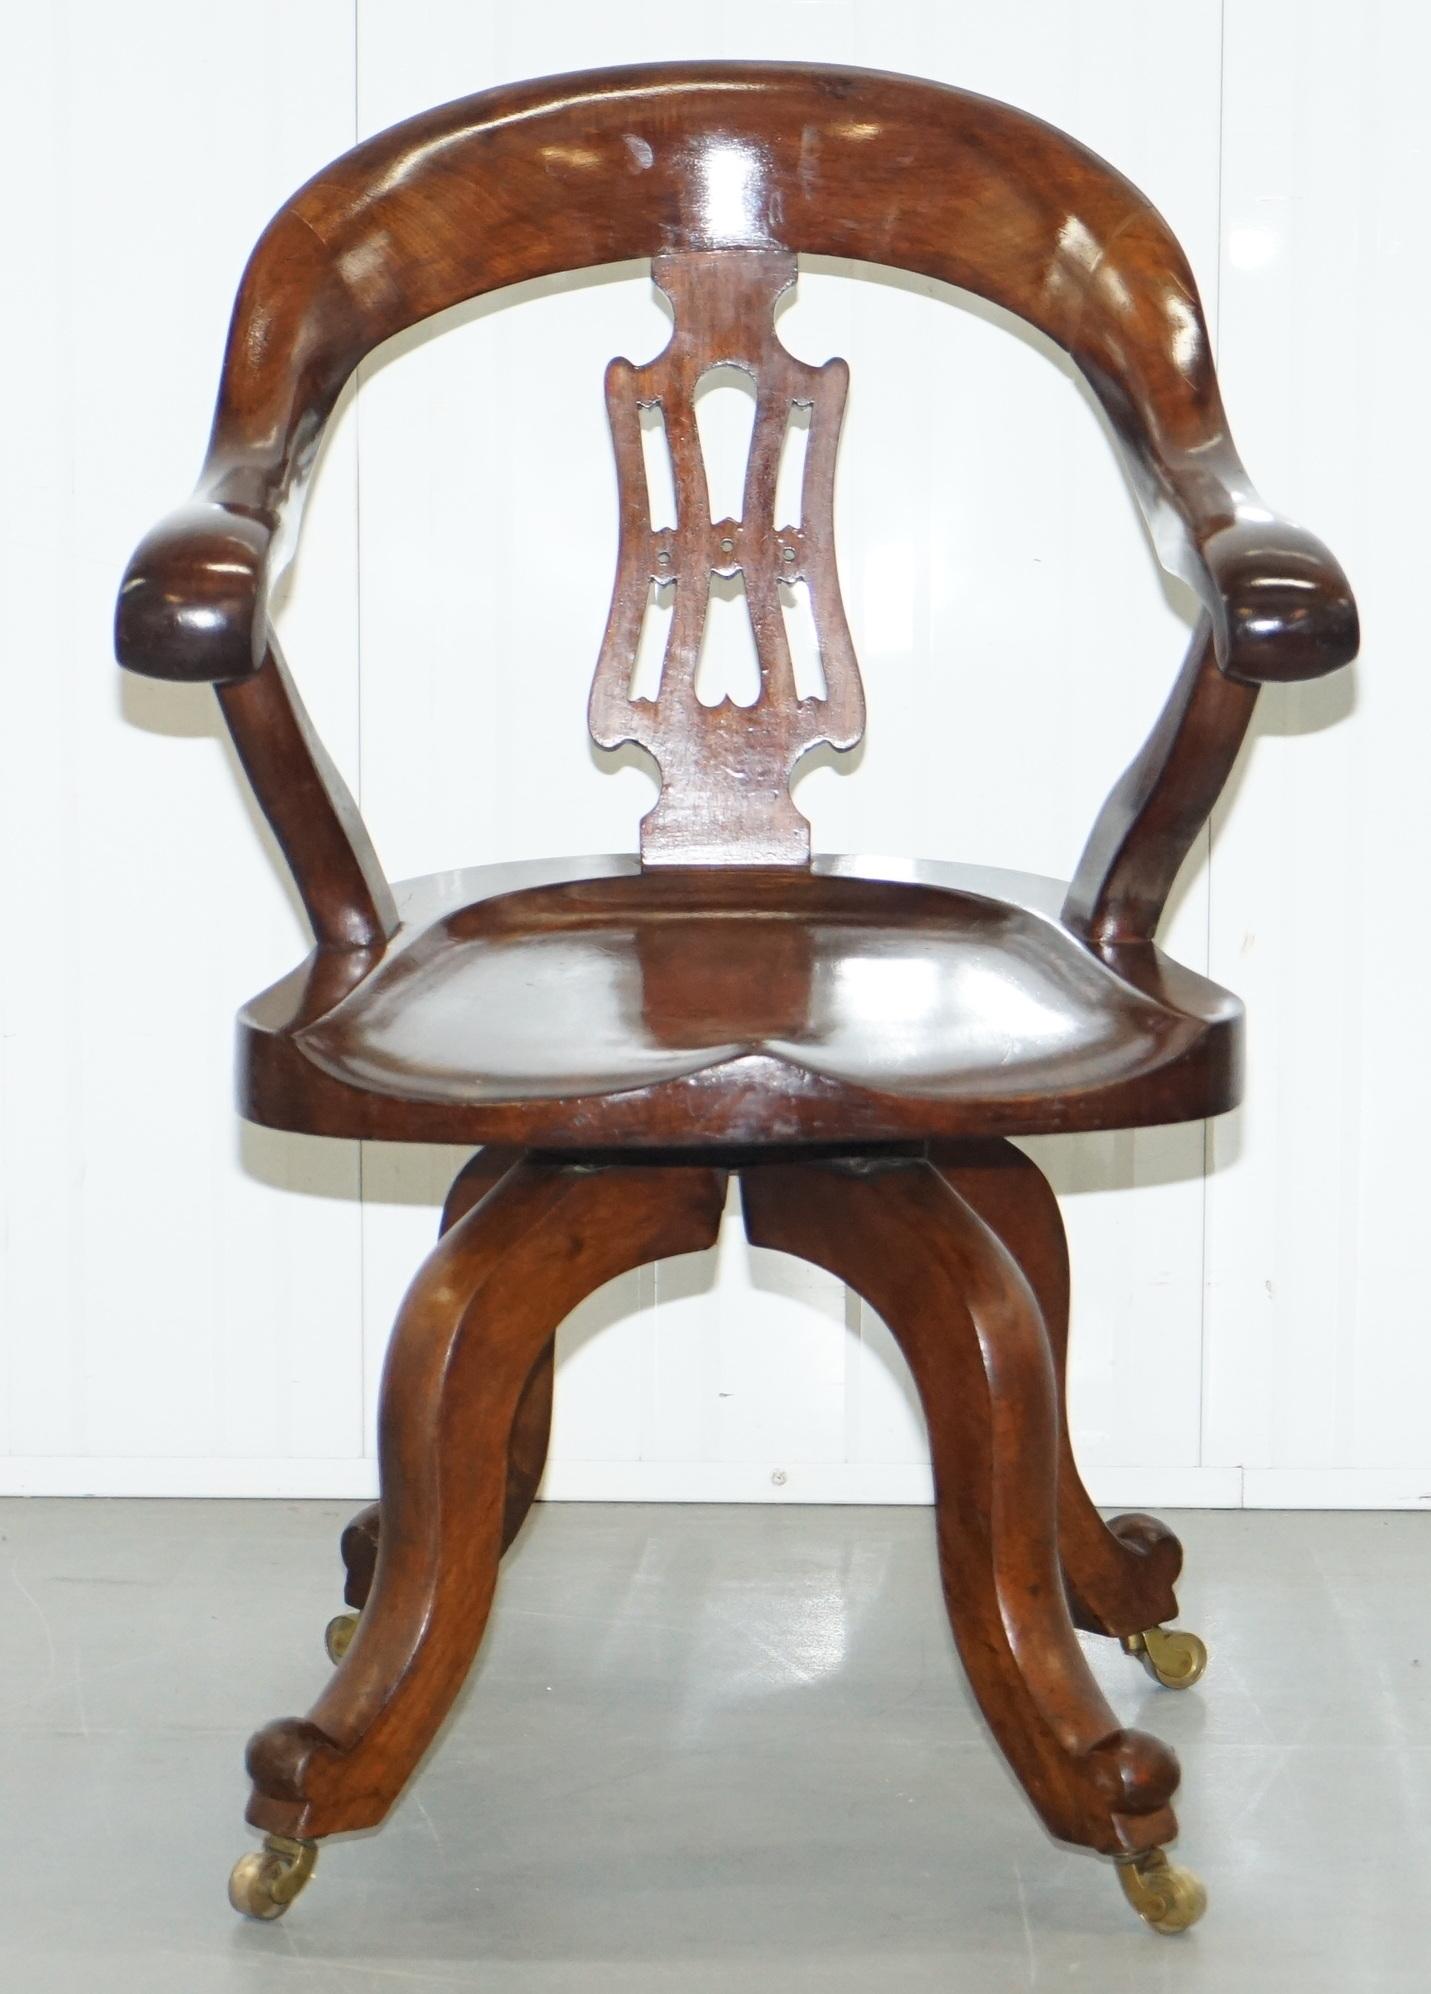 We are delighted to offer for sale this stunning original Victorian Solid mahogany swivel captain's chair

A really good looking and comfortable antique chair, the timber patina is simply glorious, the sculpted arms are very comfortable as is the